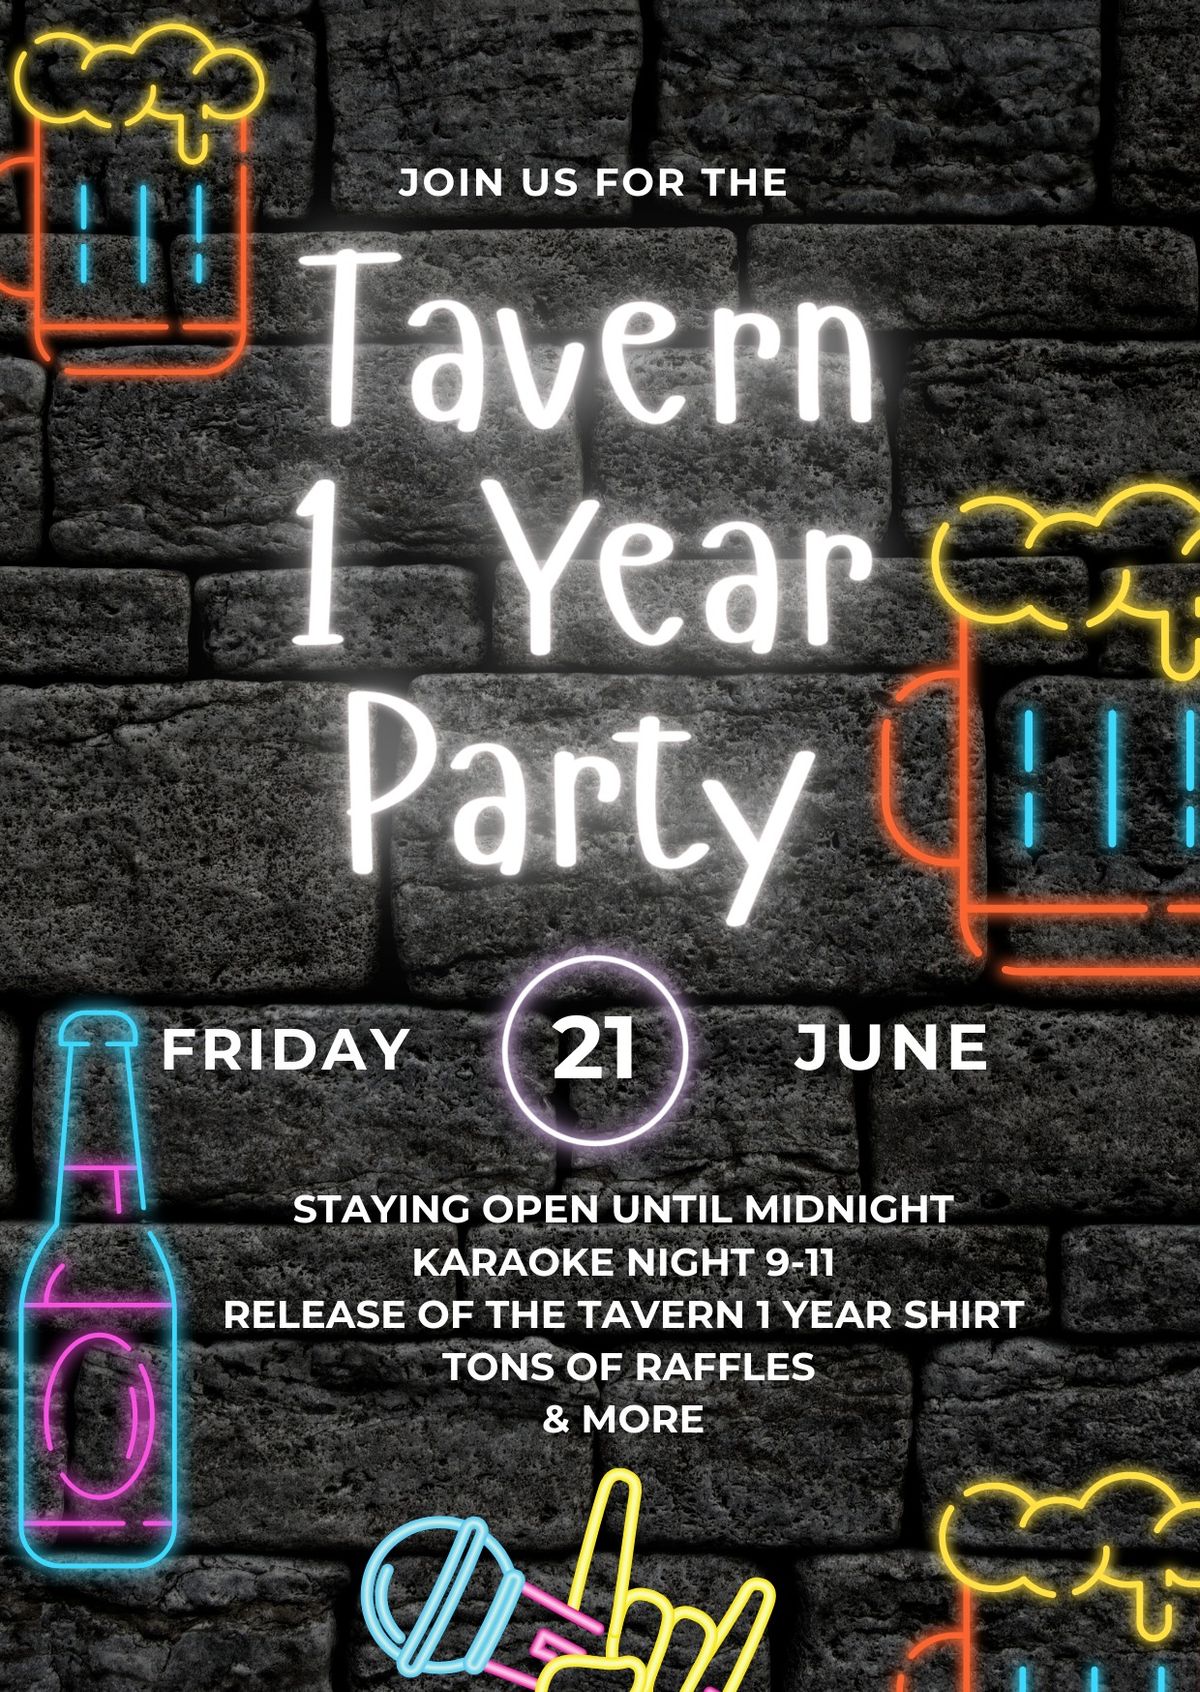 Tavern 1 Year Party